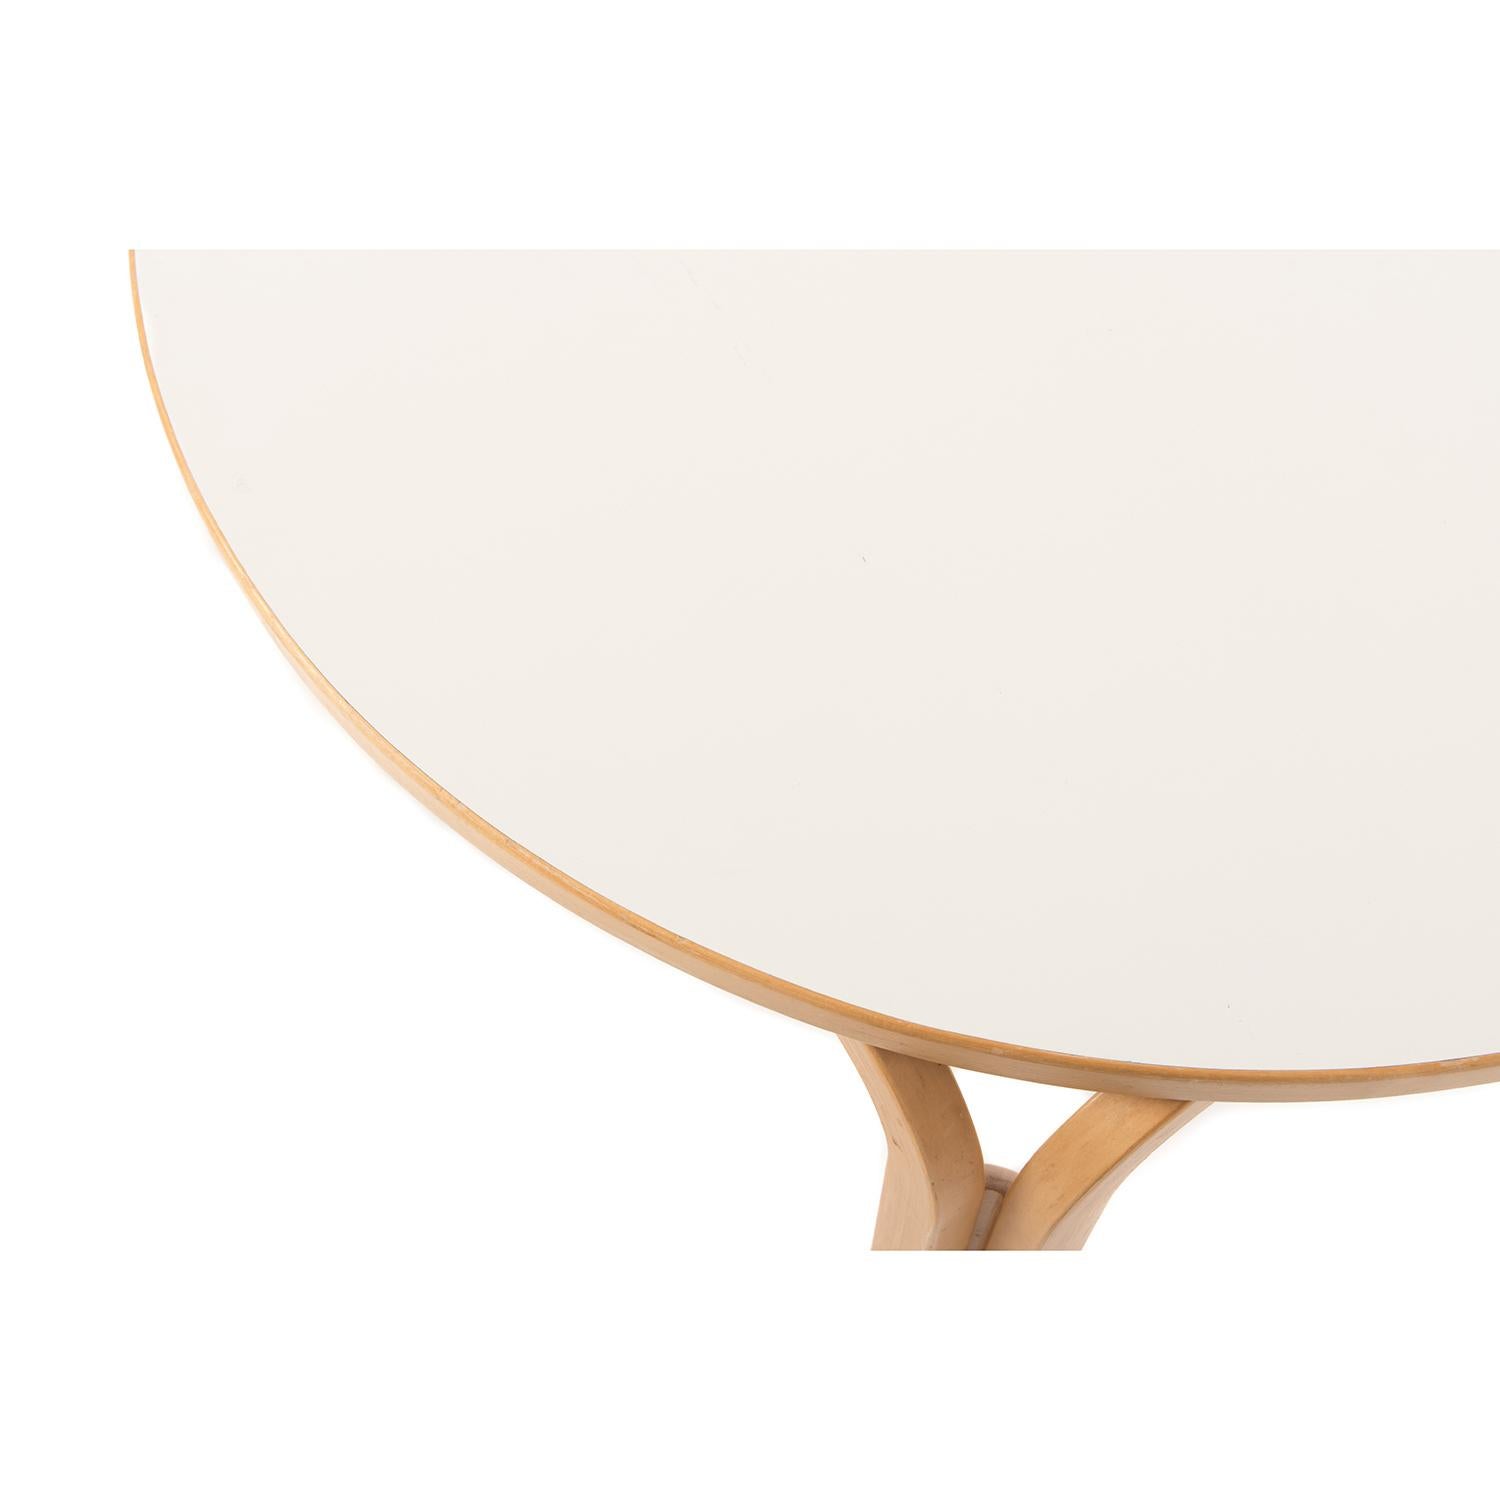 Scandinavian modern round beech dinette table with white laminate top. Great for a sunny breakfast spot!  